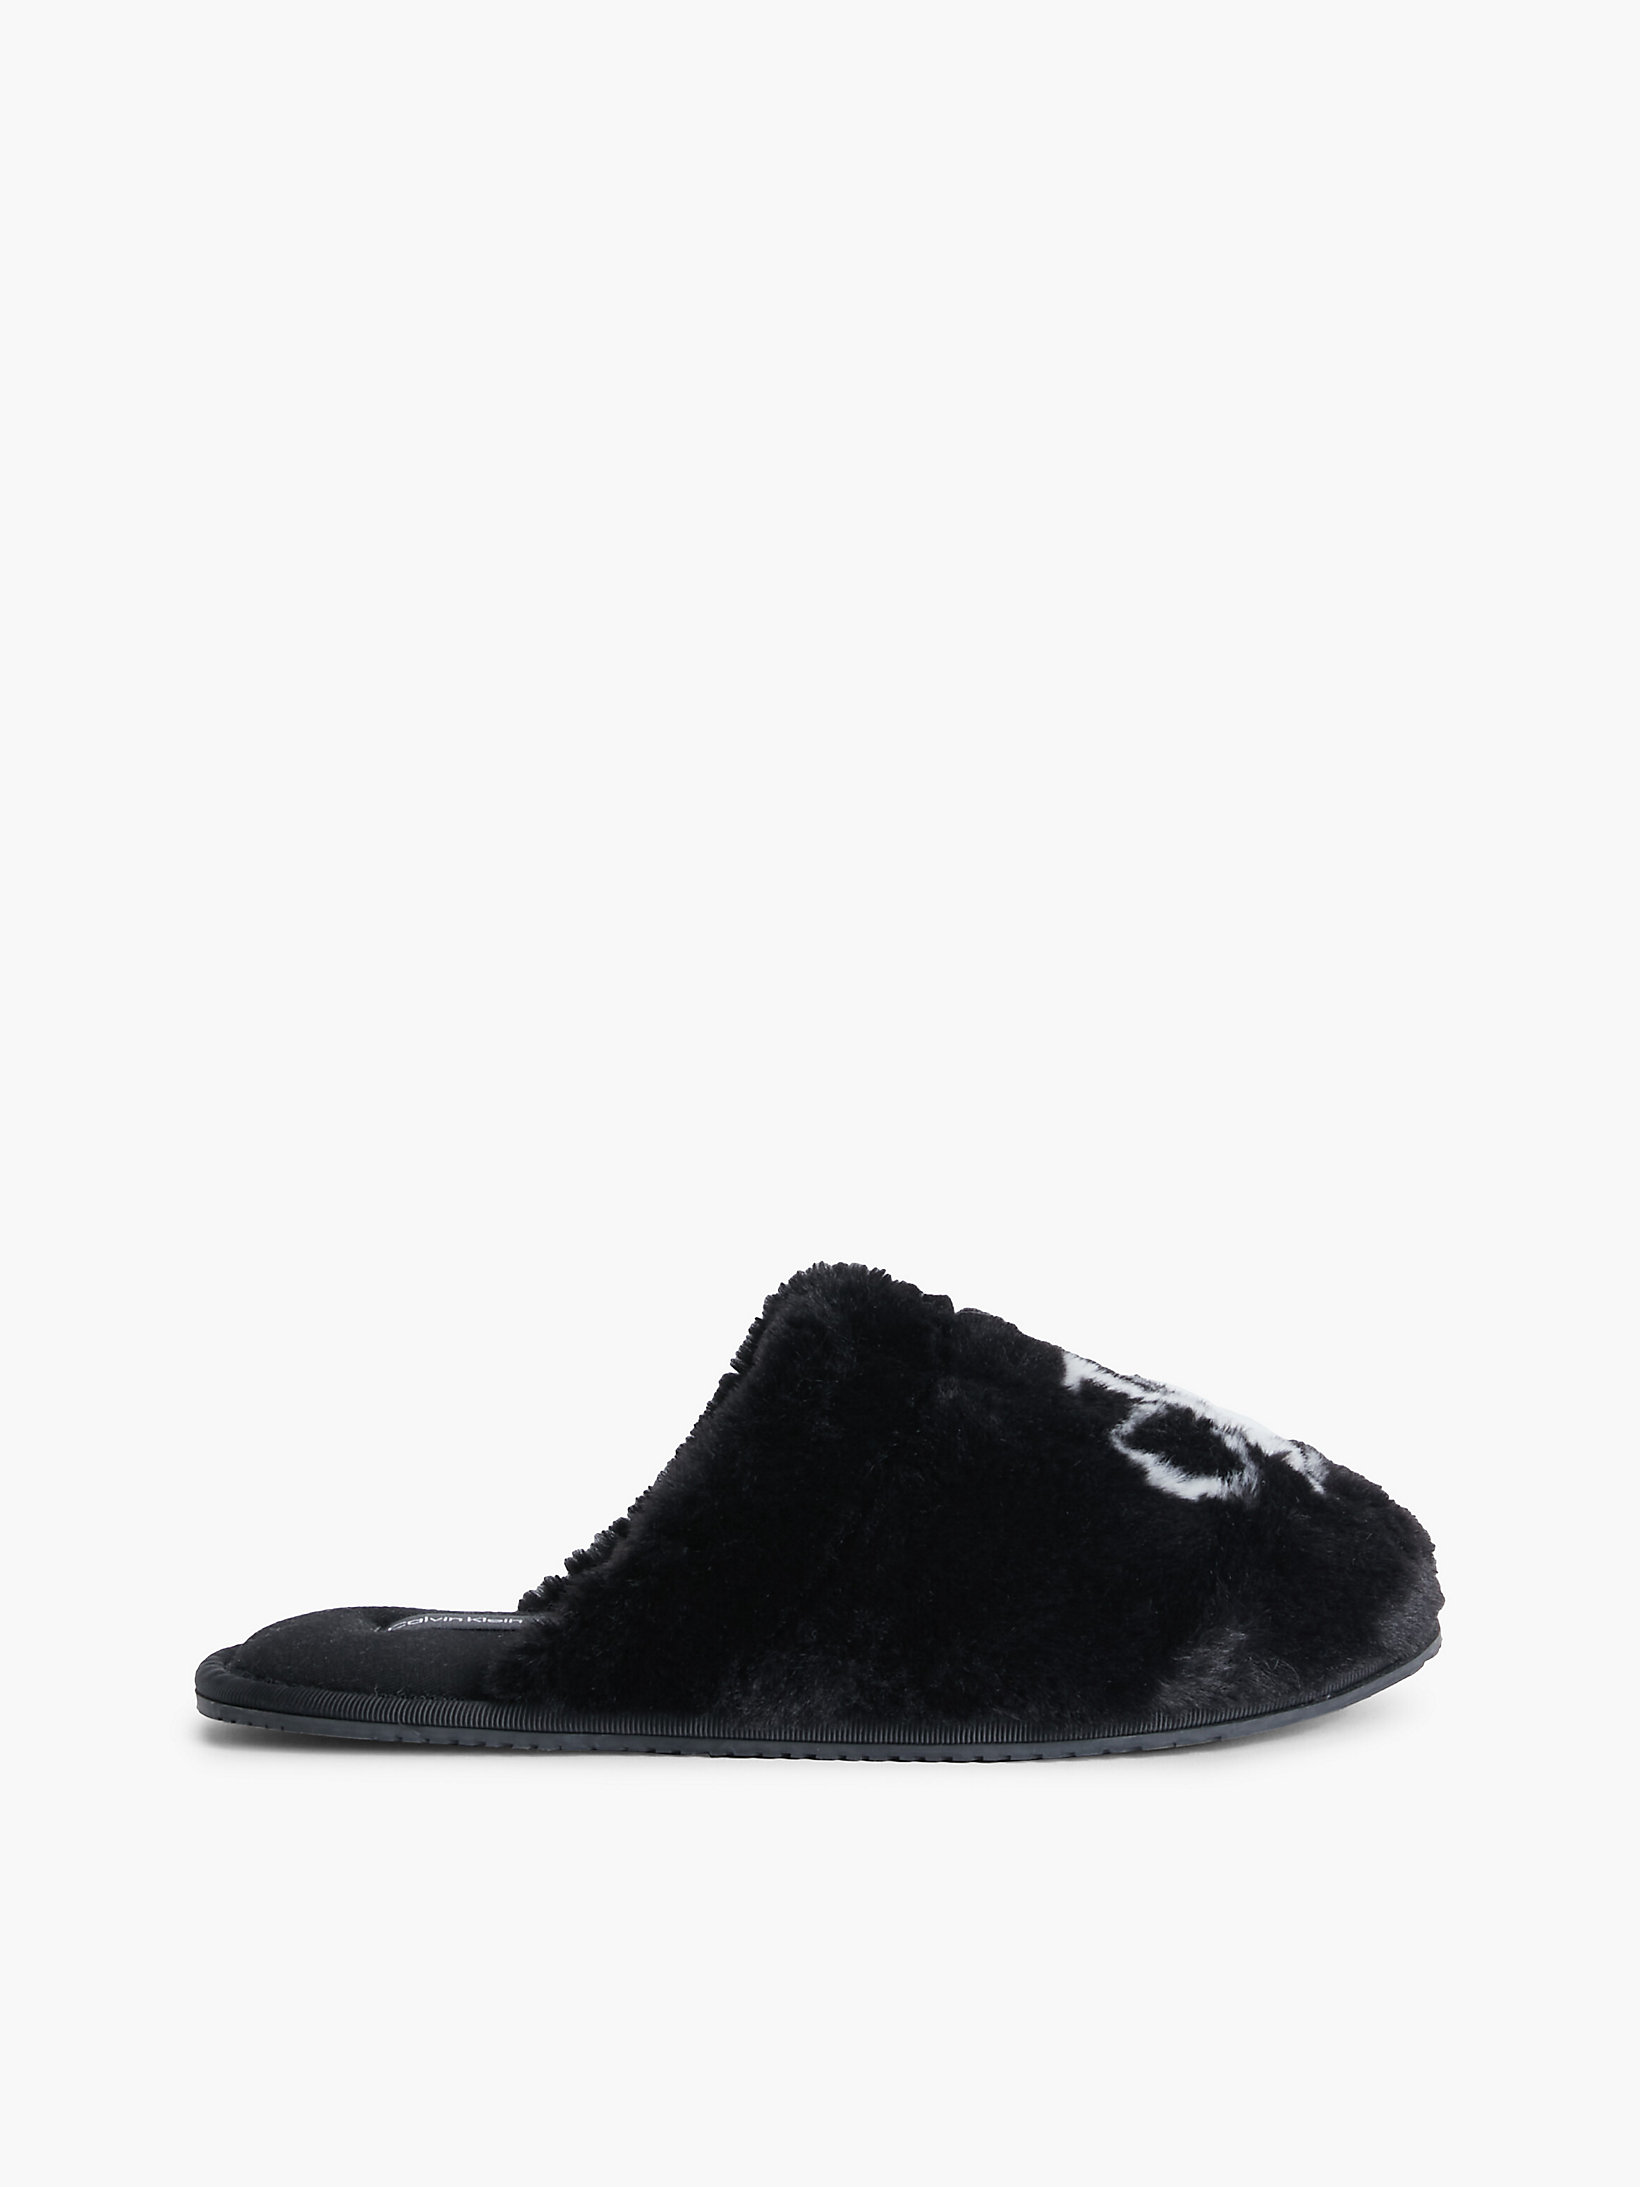 Black Recycled Faux Fur Slippers undefined women Calvin Klein